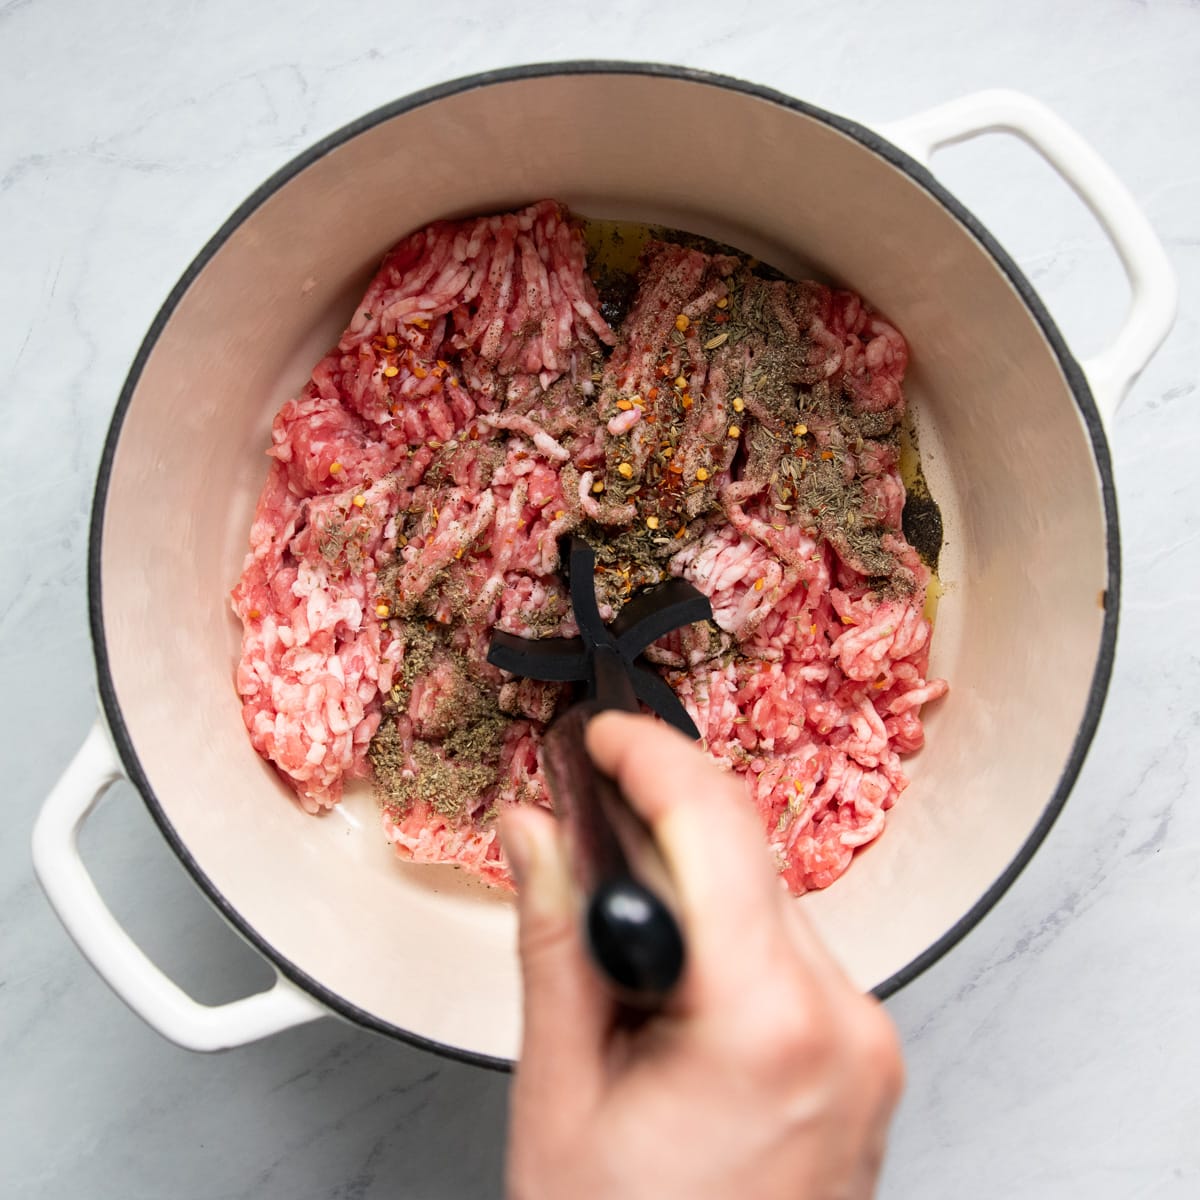 A hand is breaking up ground pork in a Dutch oven with a meat masher